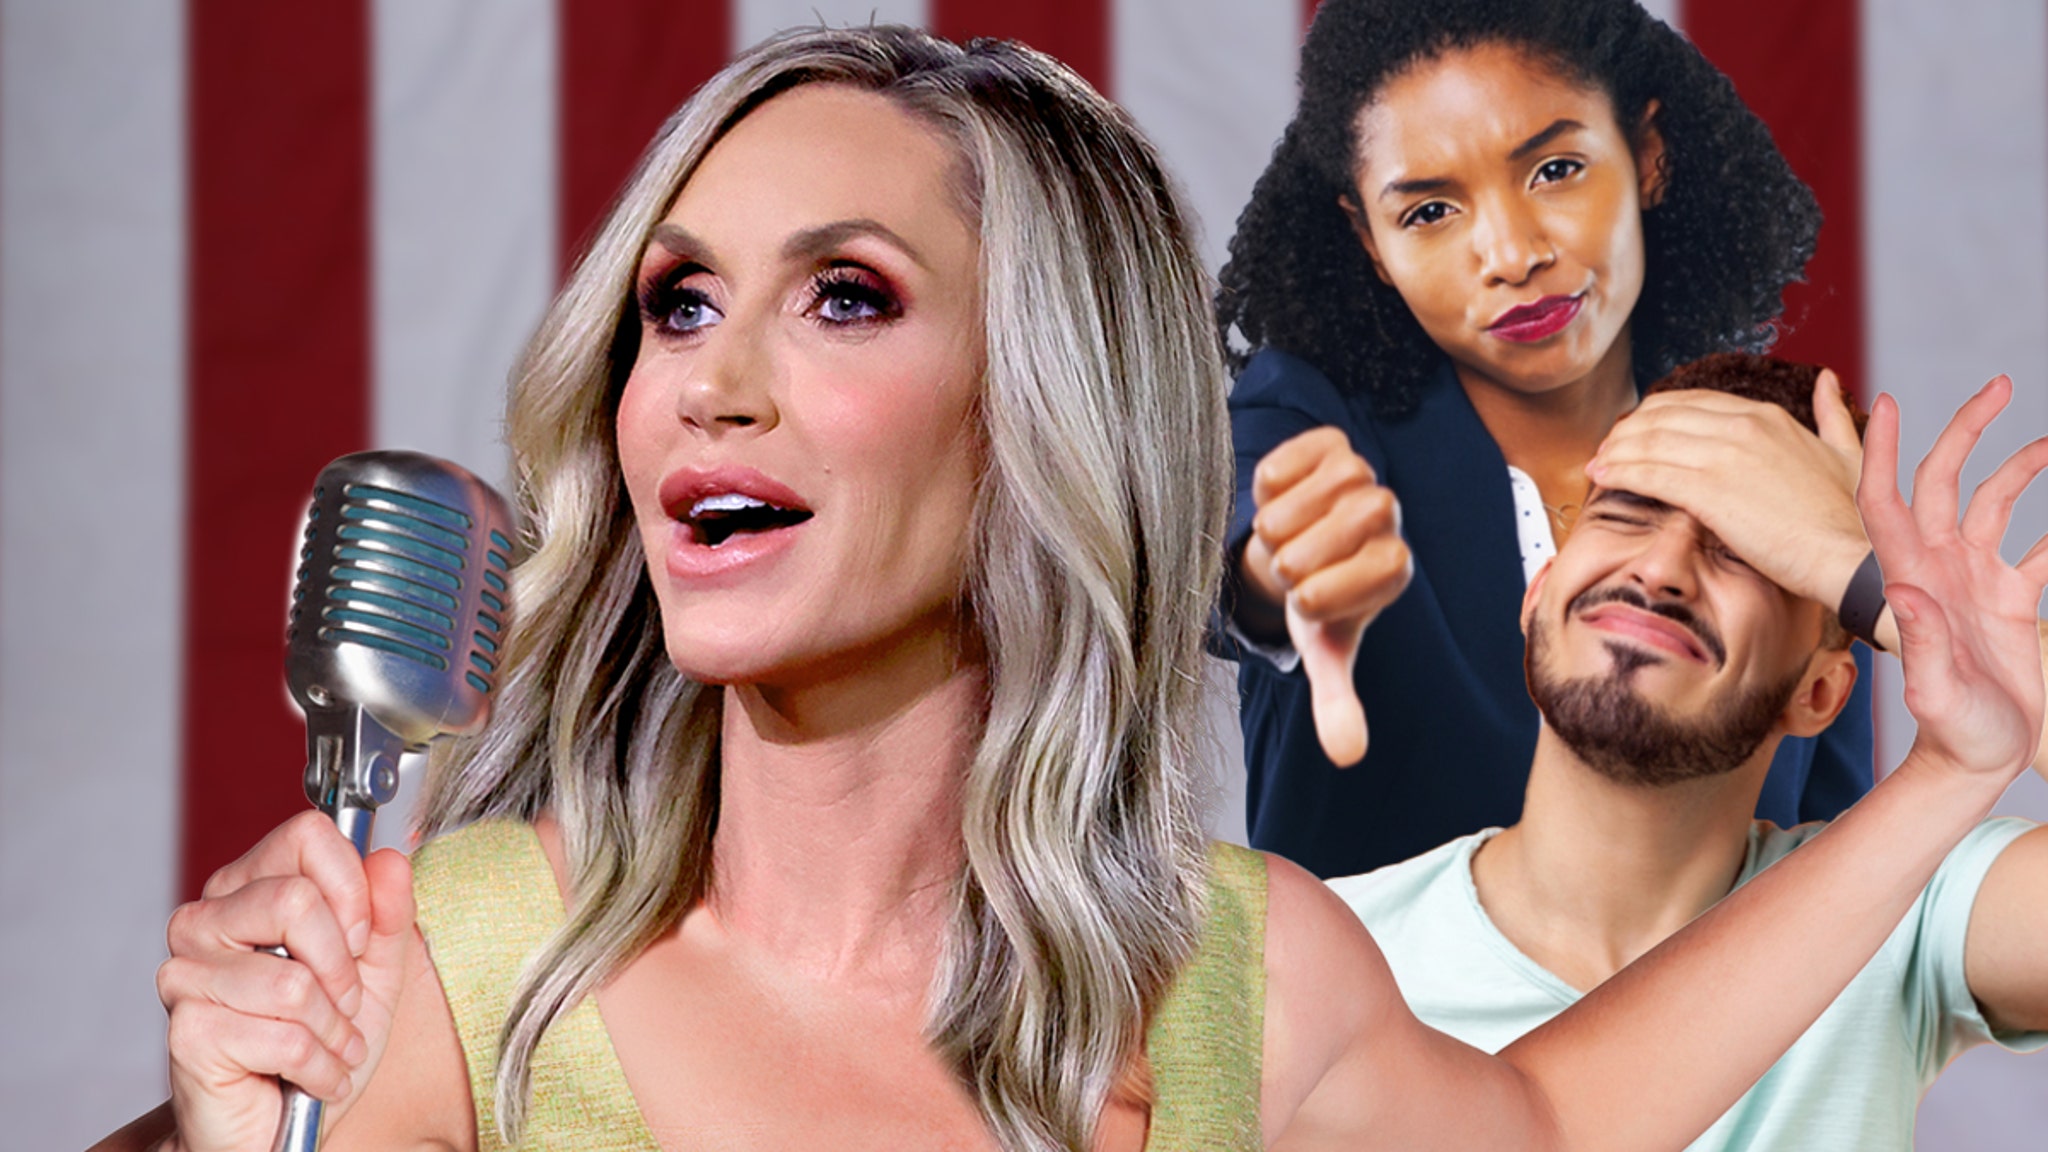 Lara Trump's Newly Released Song Track Roasted by DNC with AI Diss Track